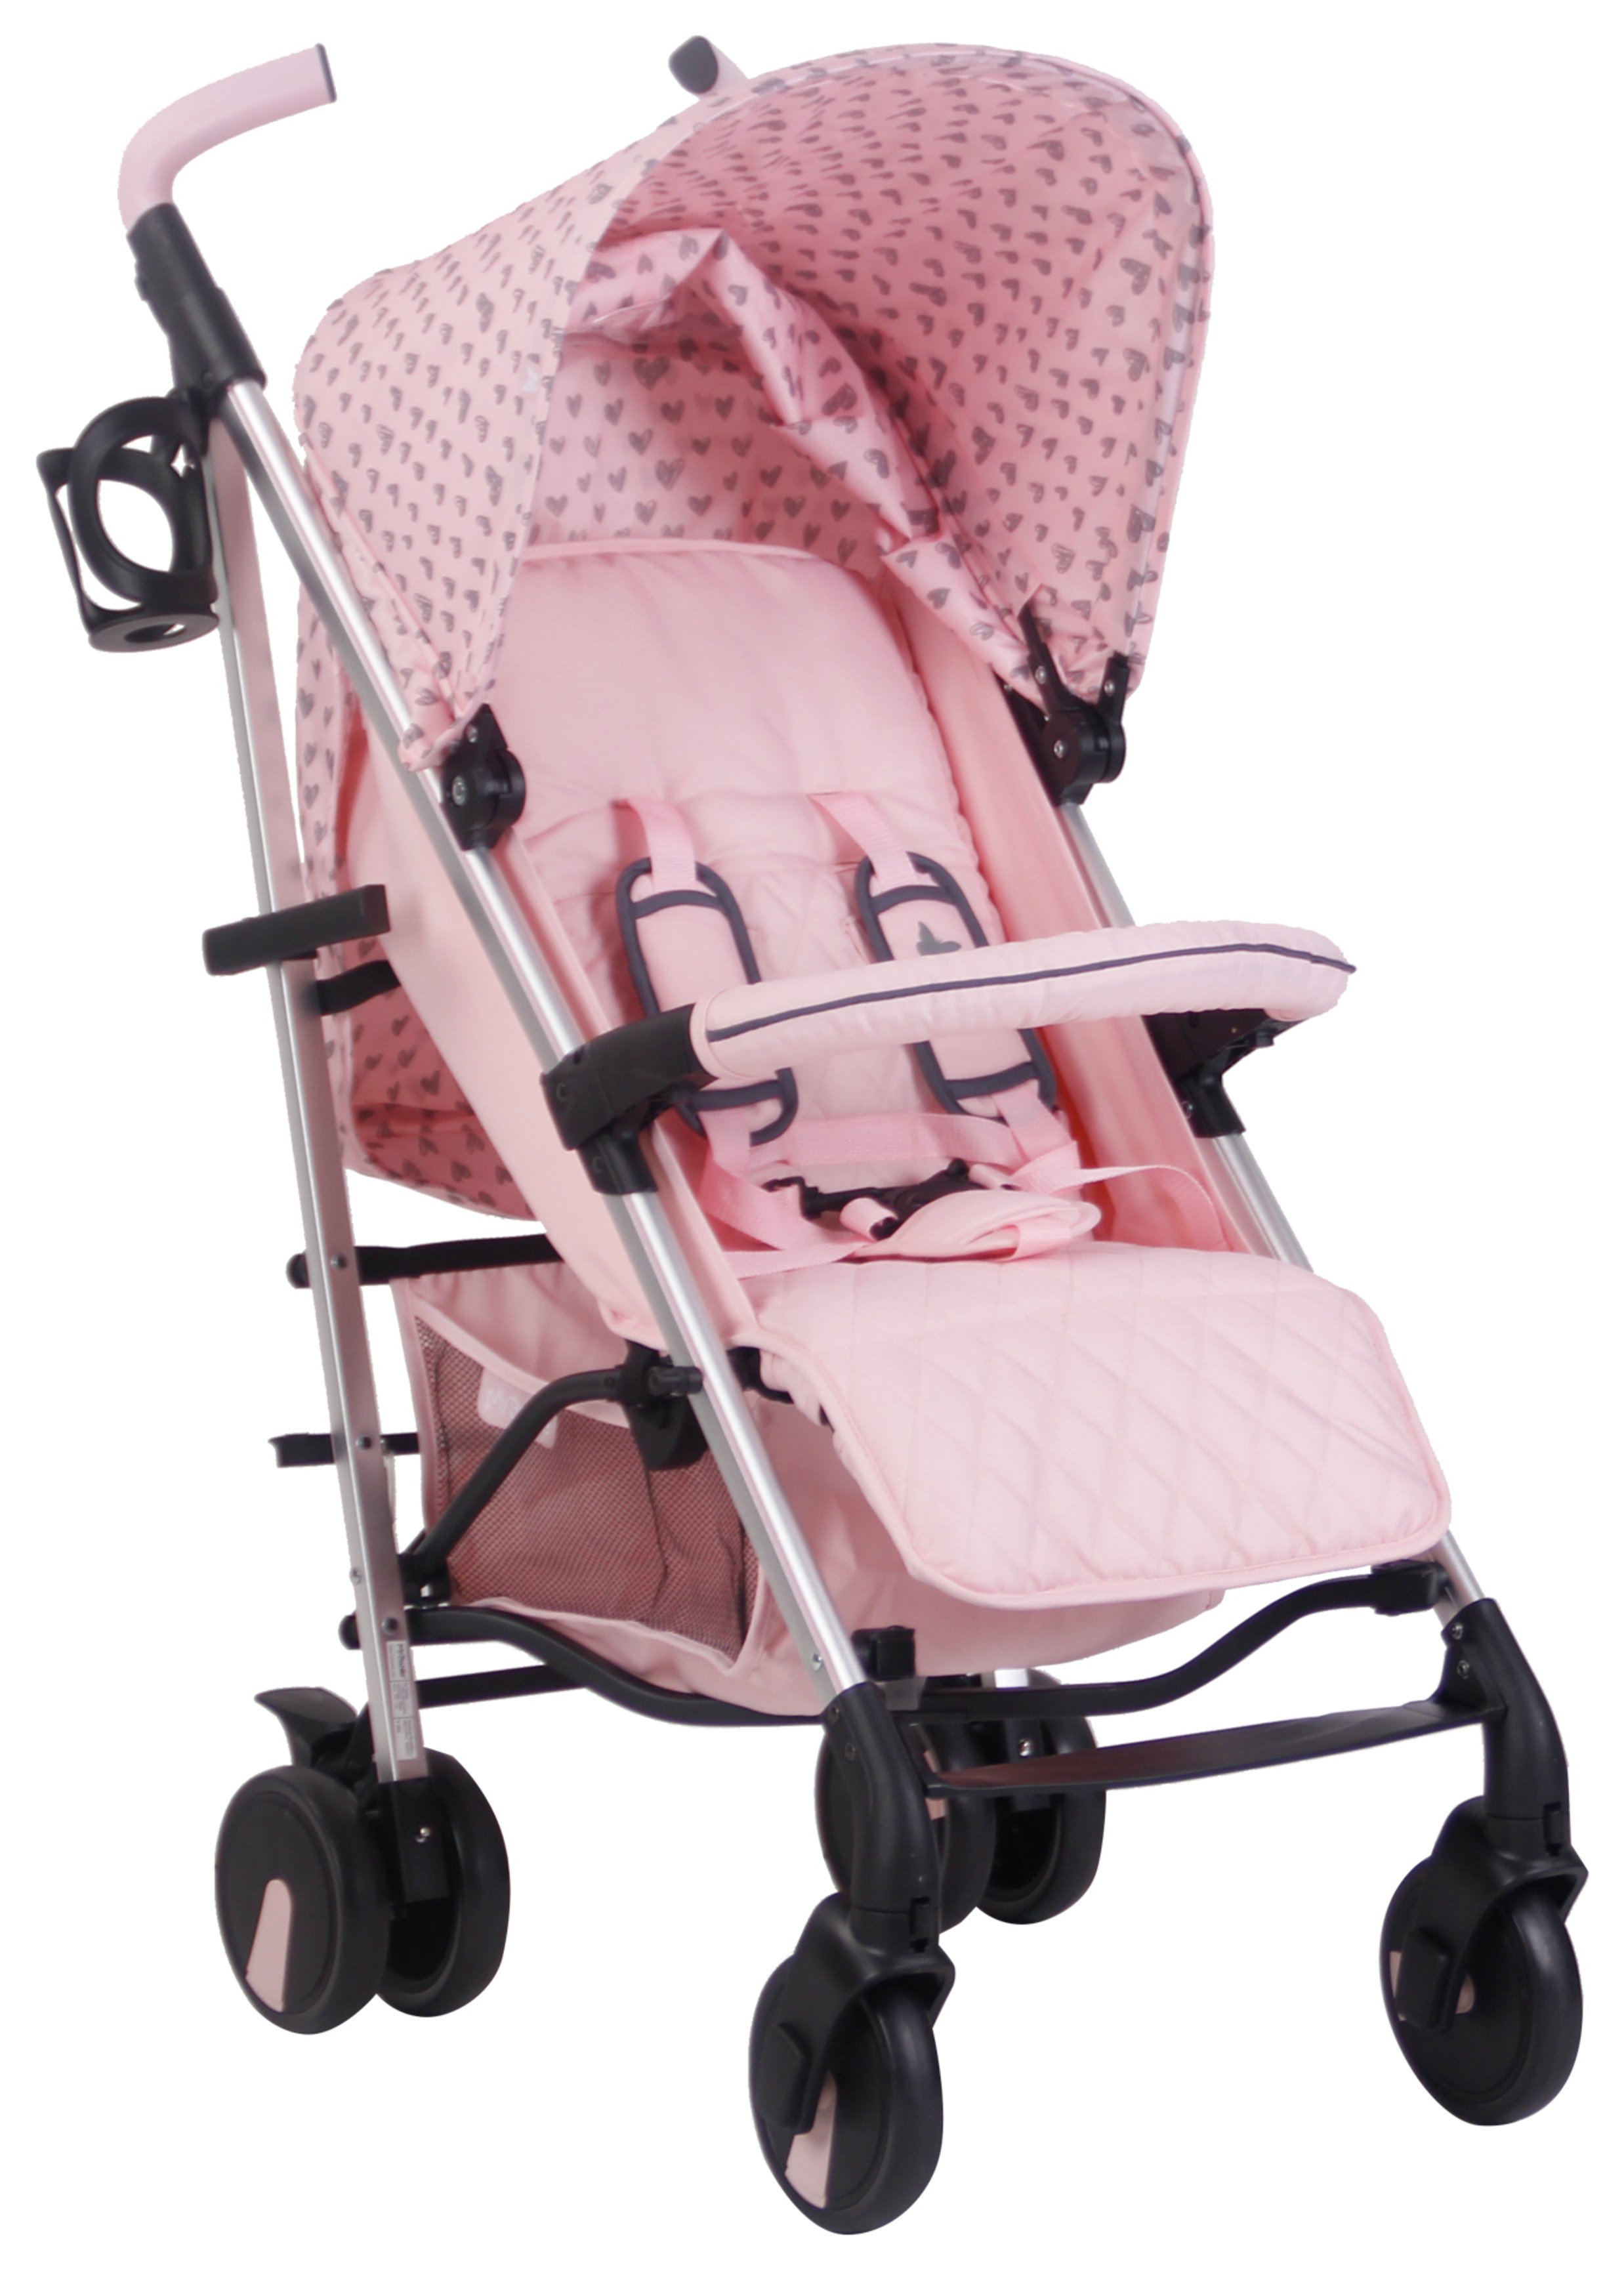 My Babiie Katie Piper MB51 Hearts Stroller - Pink